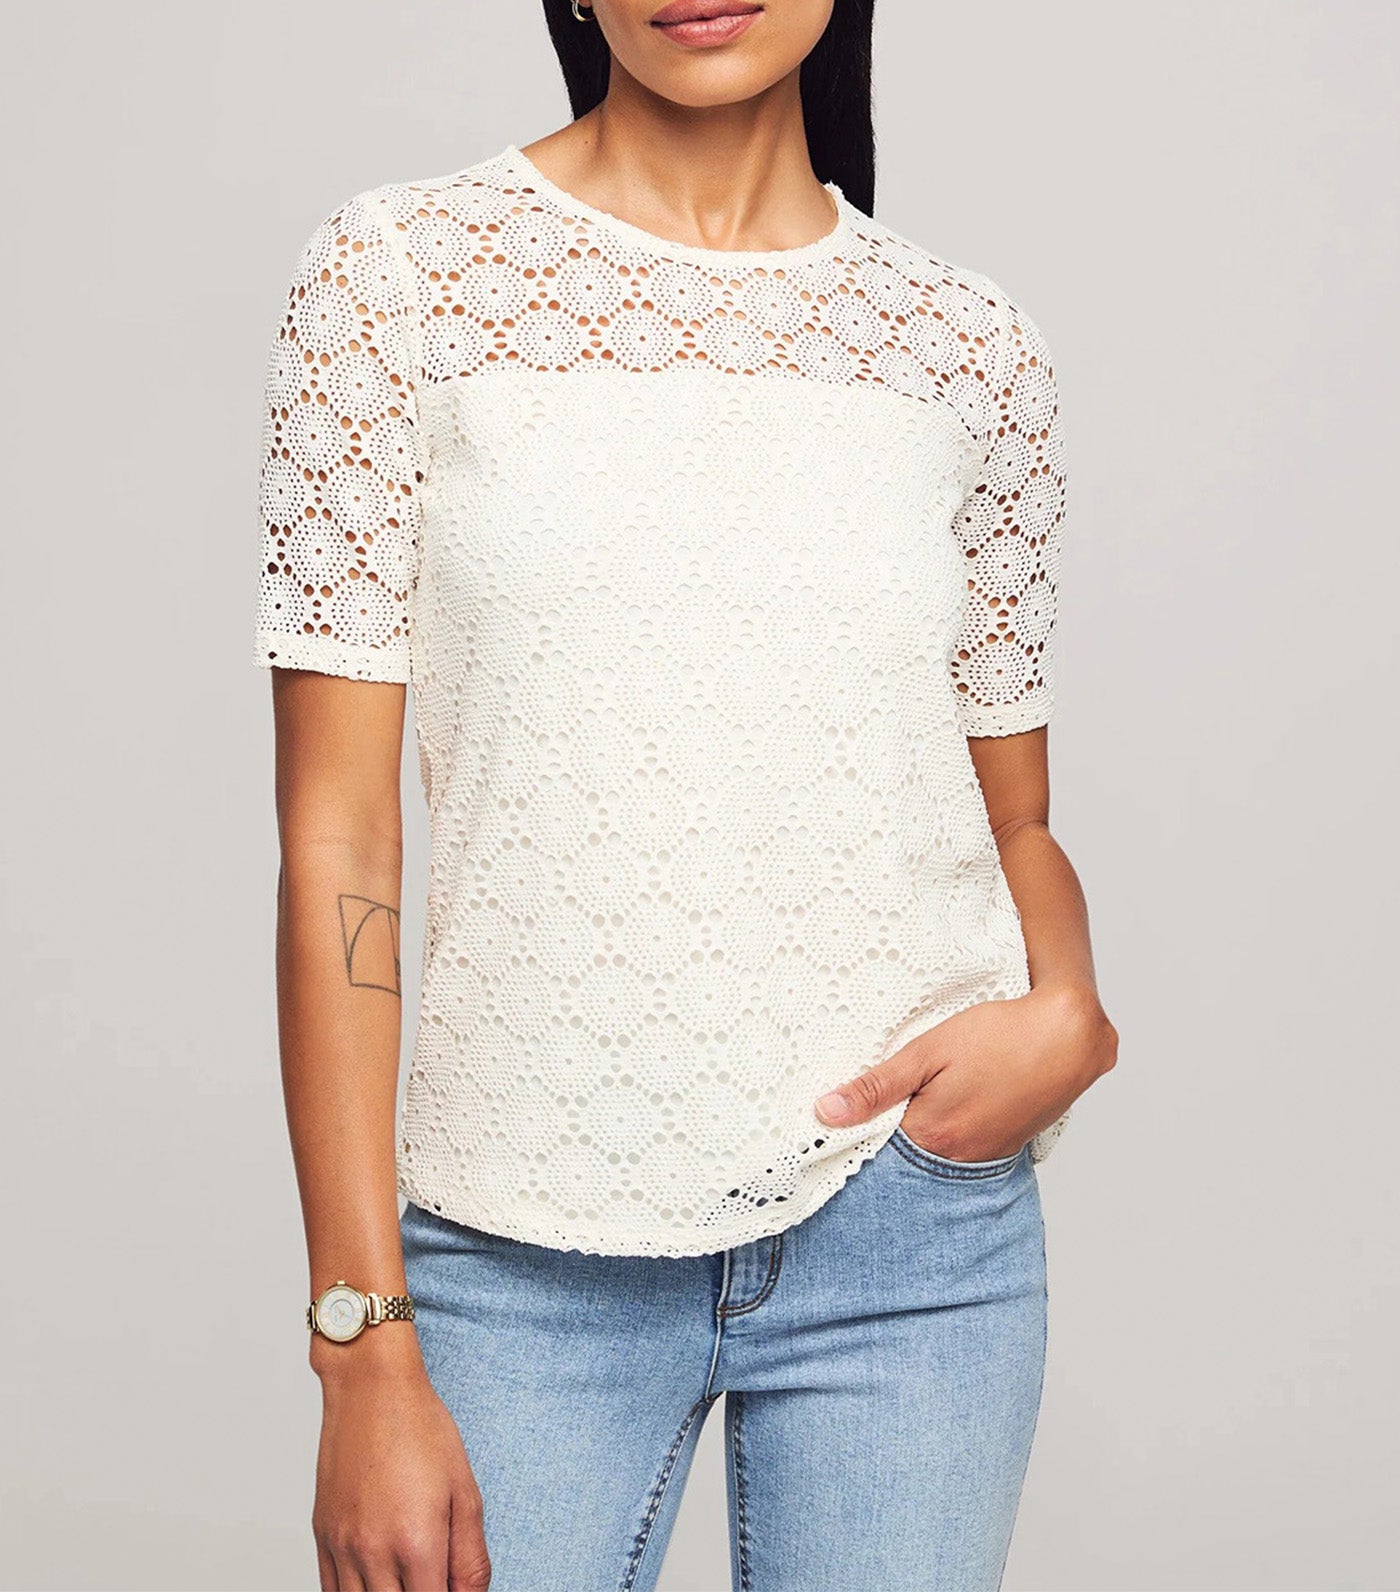 Lace Knit Elbow Sleeve Lace Tee Anne White